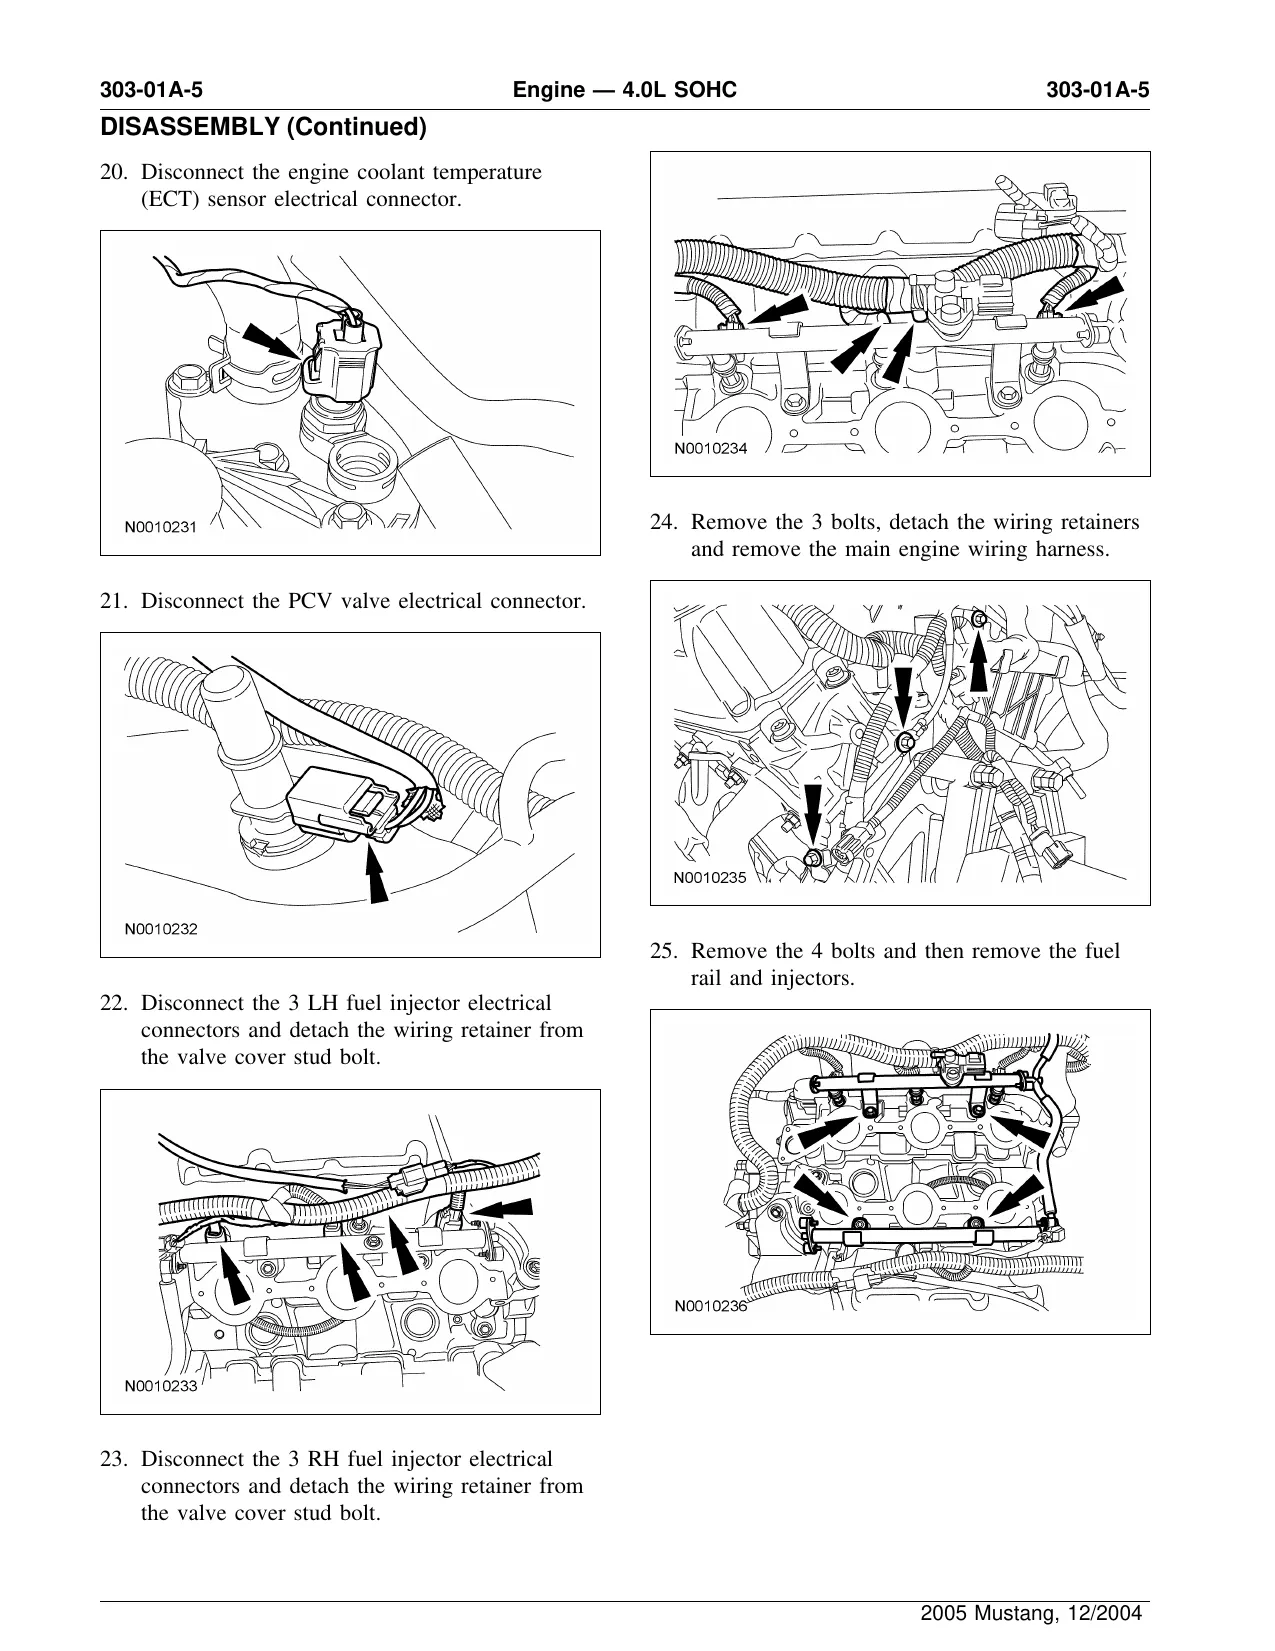 2005-2010 Ford Mustang service manual Preview image 5